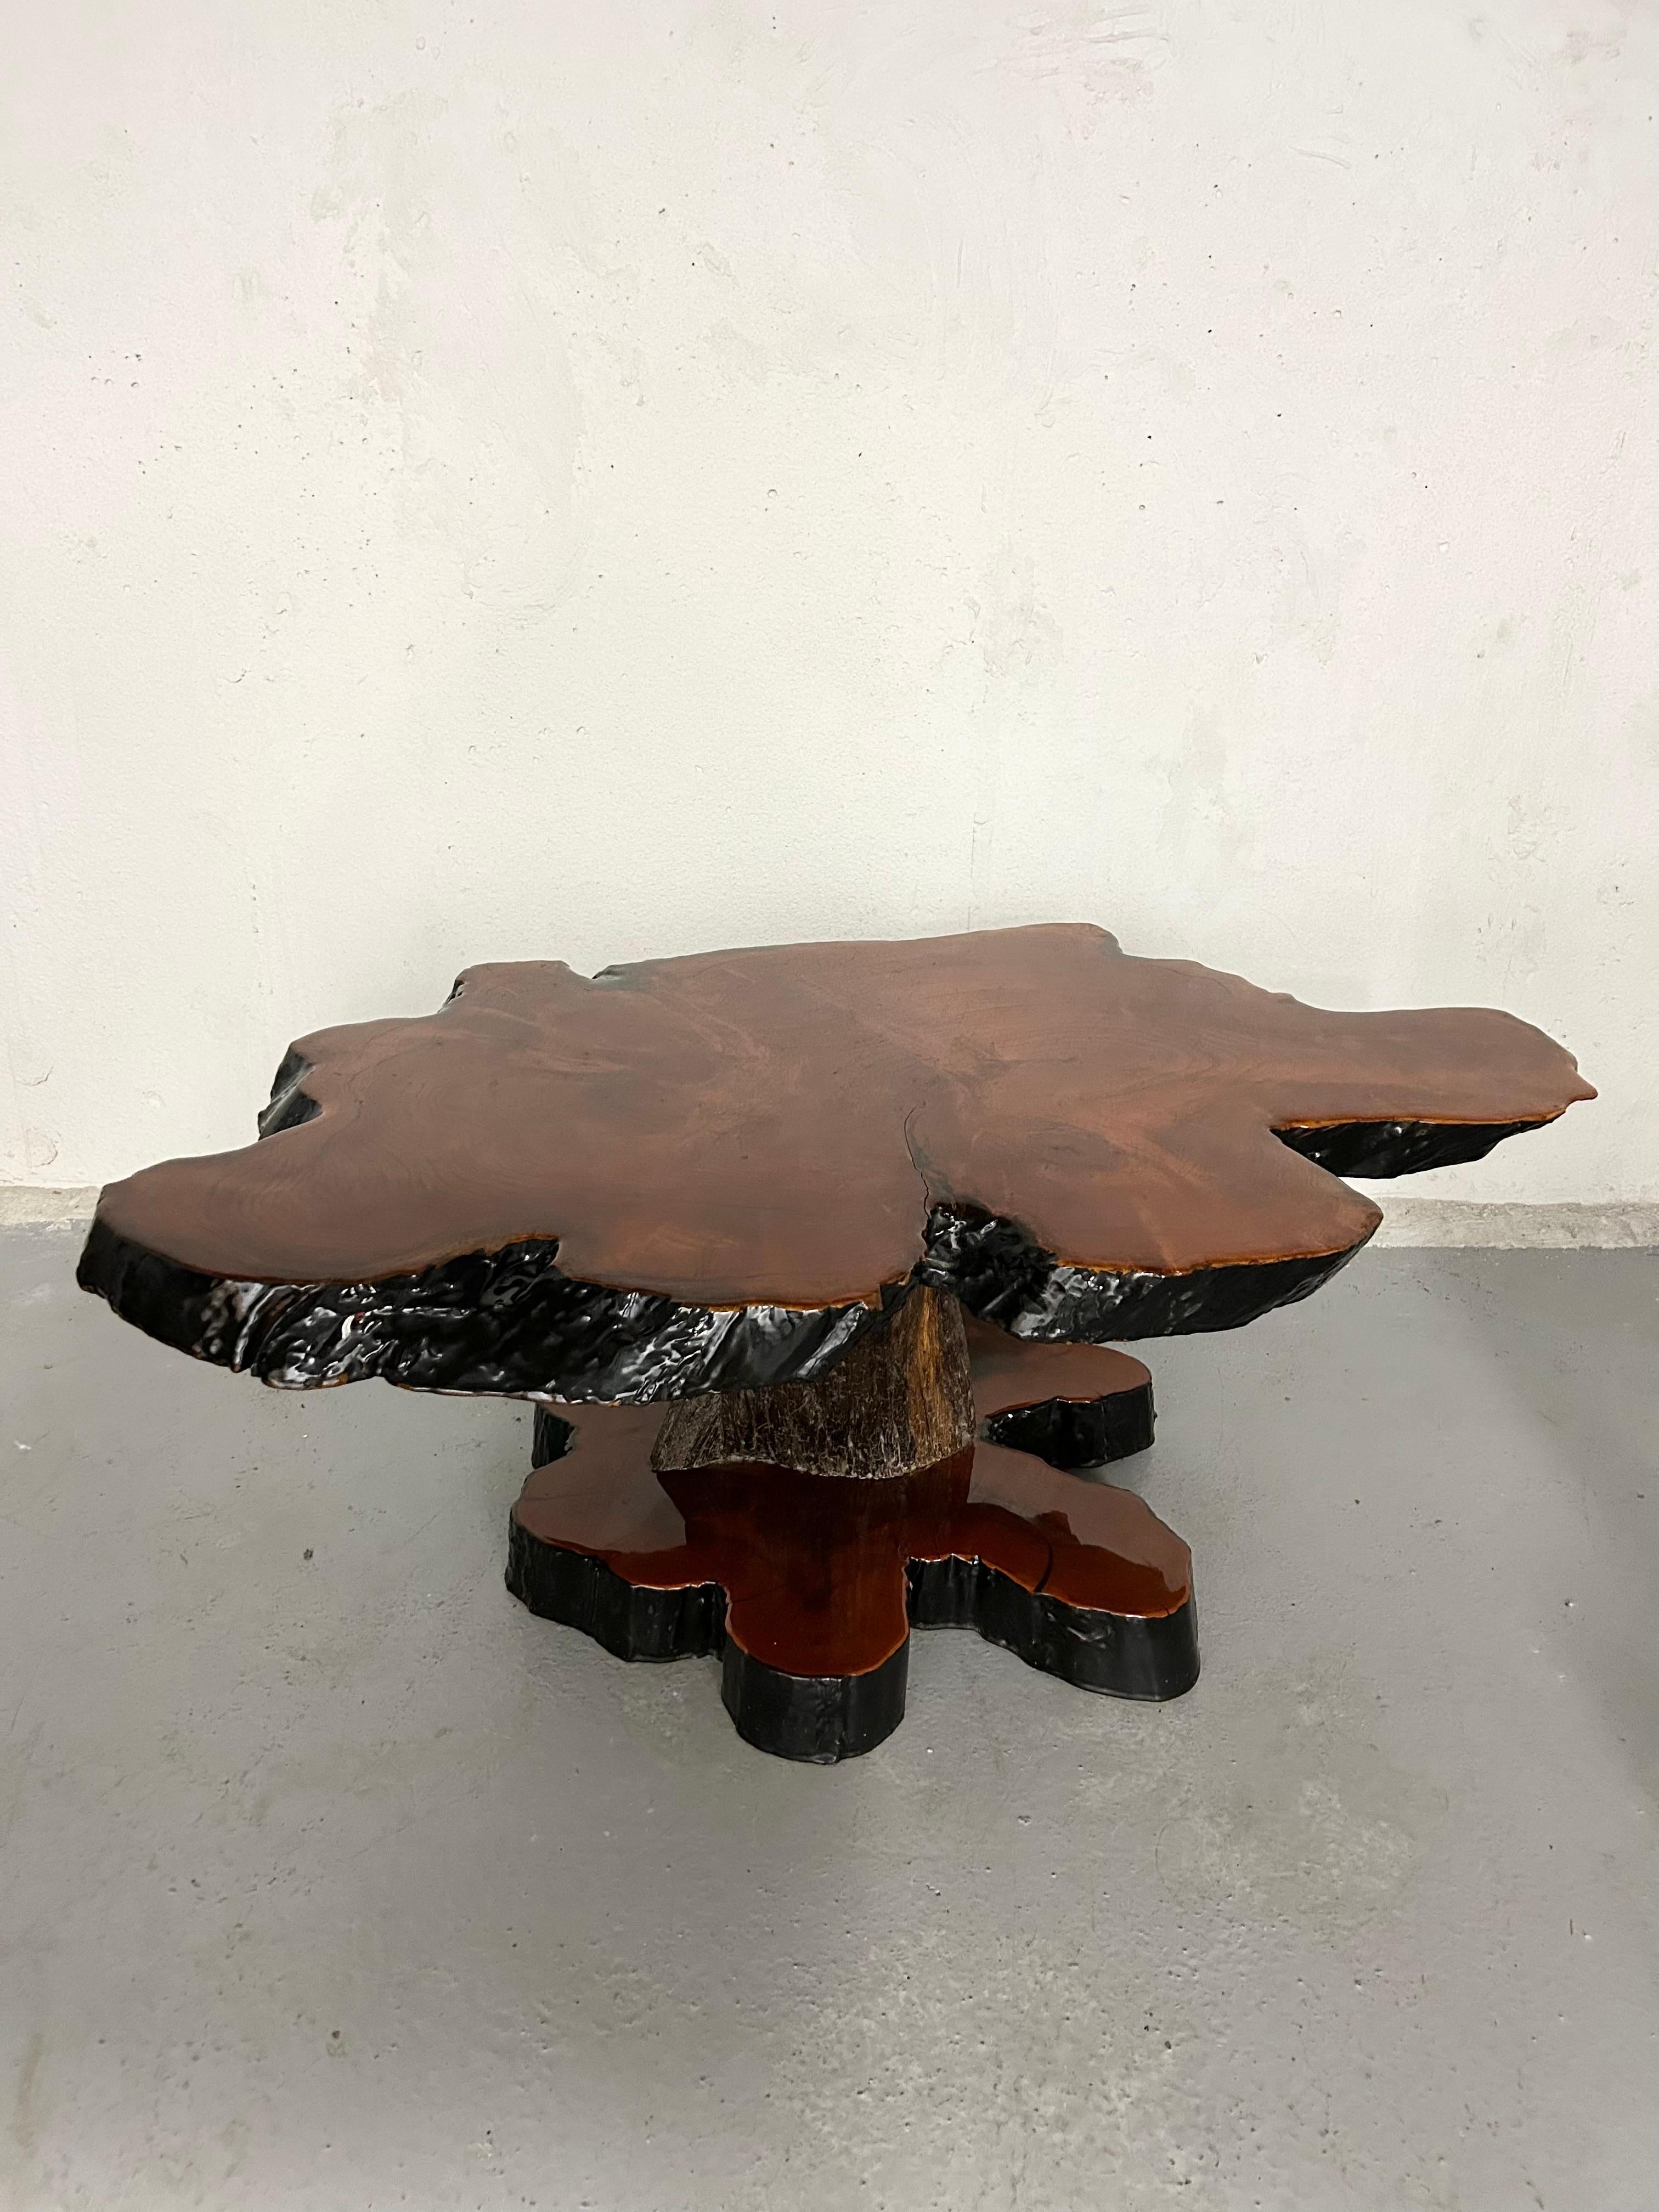 Vintage live edge burl wood coffee table made from mahogany. Edges of top and bottom base are painted black. Surfaces and edges are sealed with lacquer. Minimal wear. The table top has normal surface wear. There is one small crack in the lacquer on